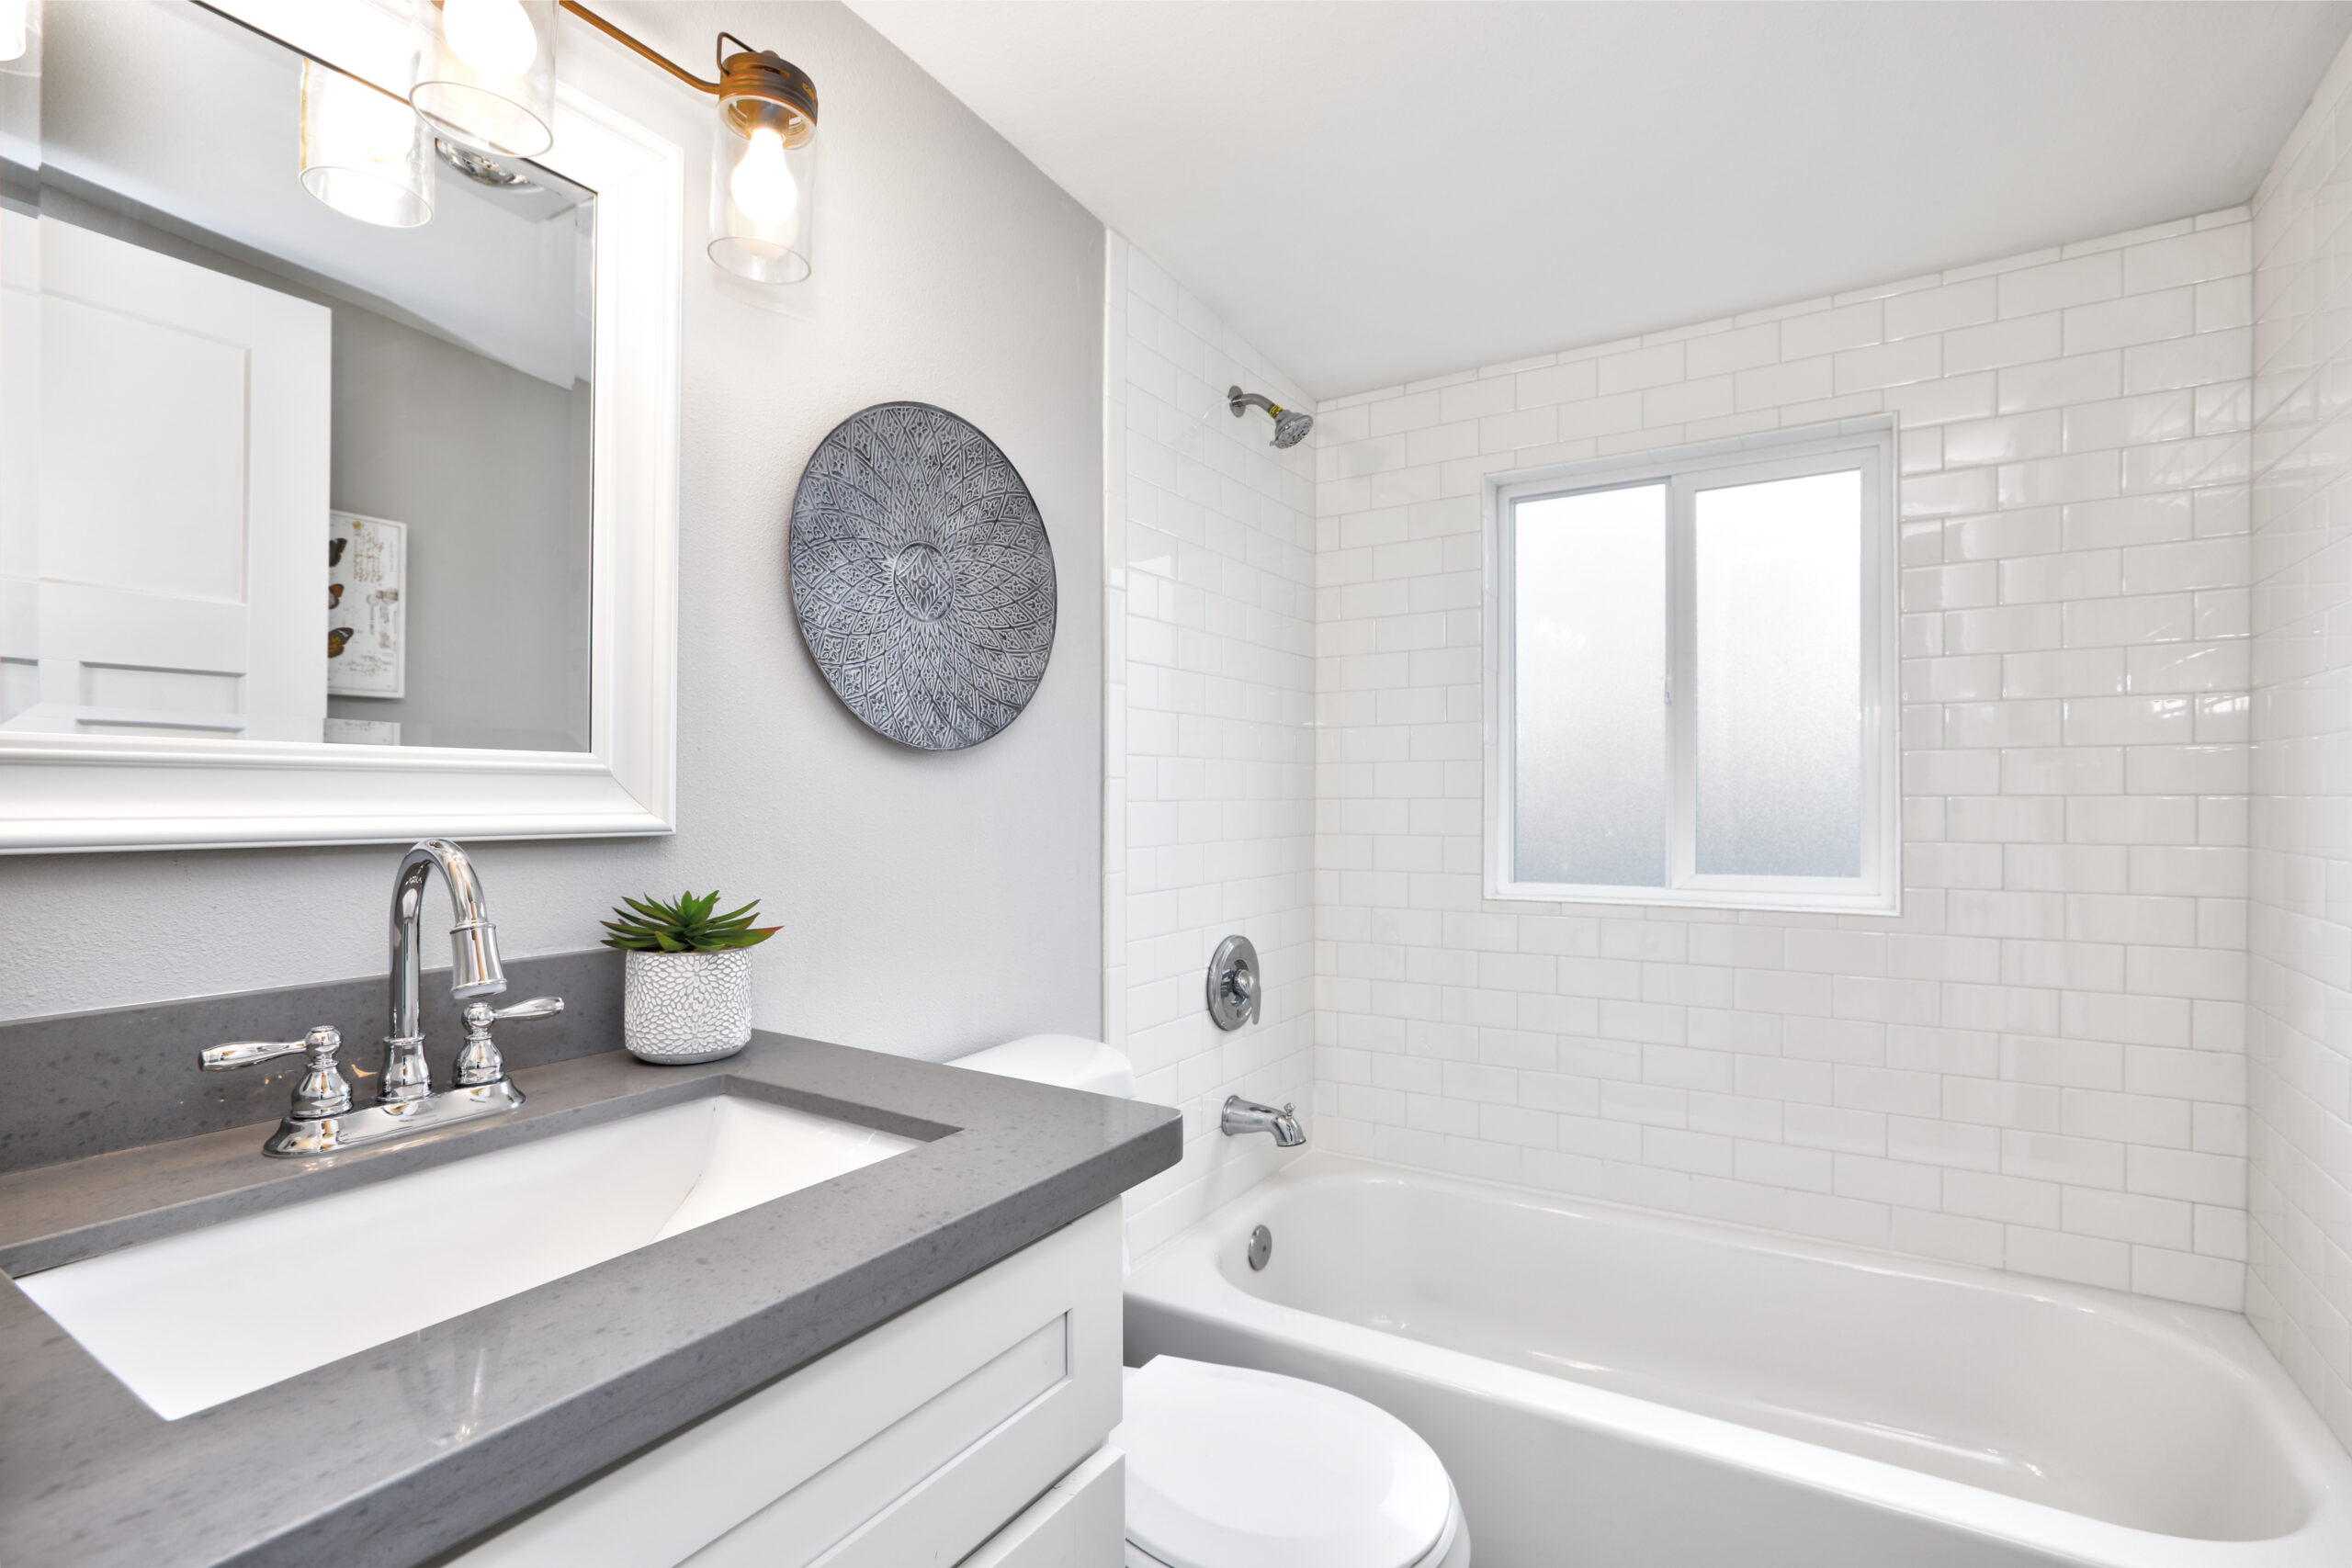 Bathroom Design Tips for Small Spaces